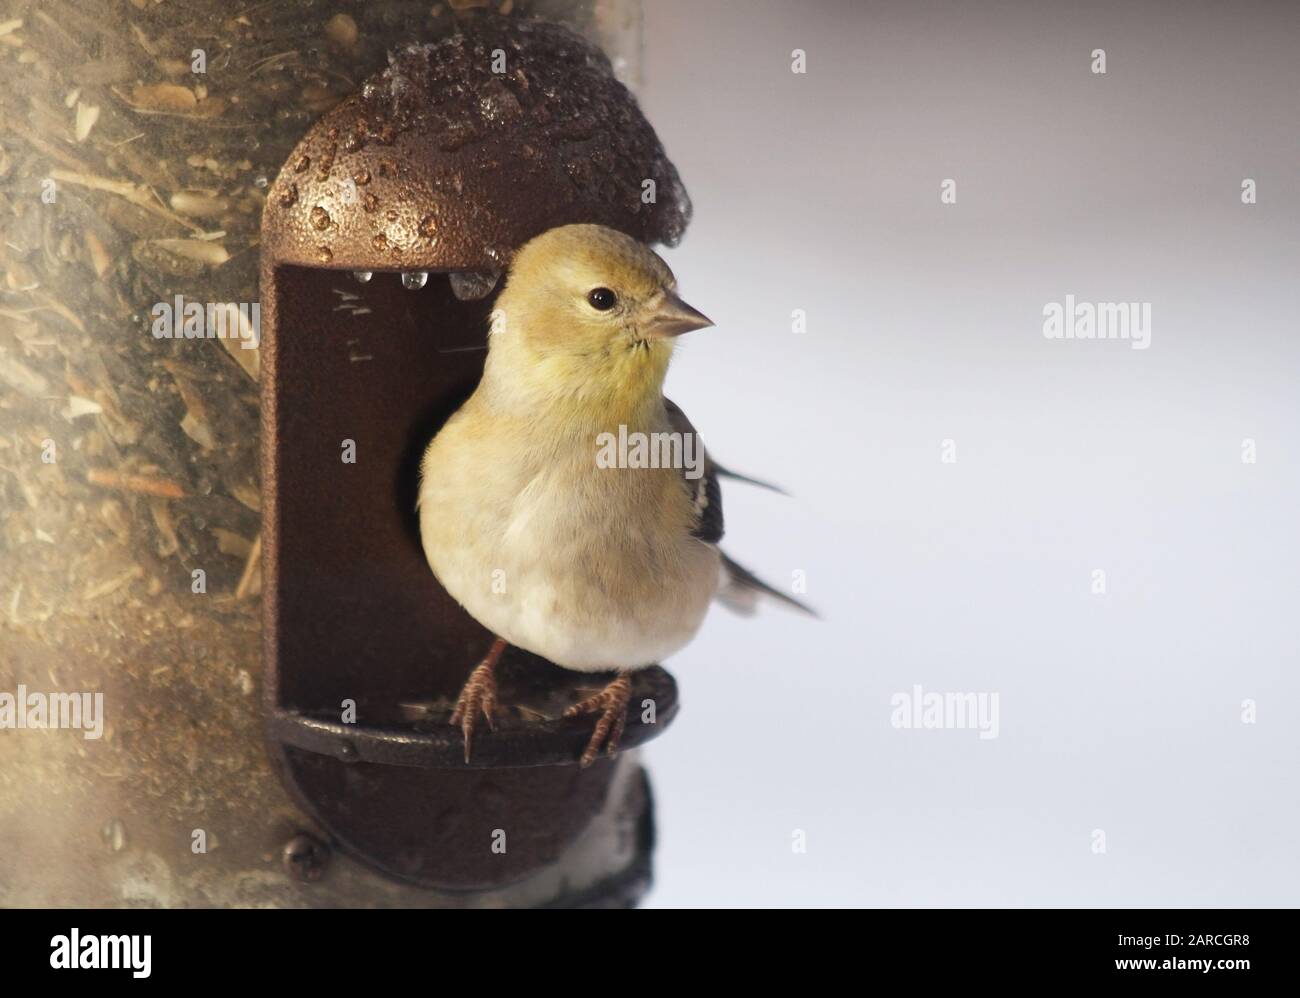 One tiny Yellow Finch perched on a seed filled metal bird feeder Stock Photo